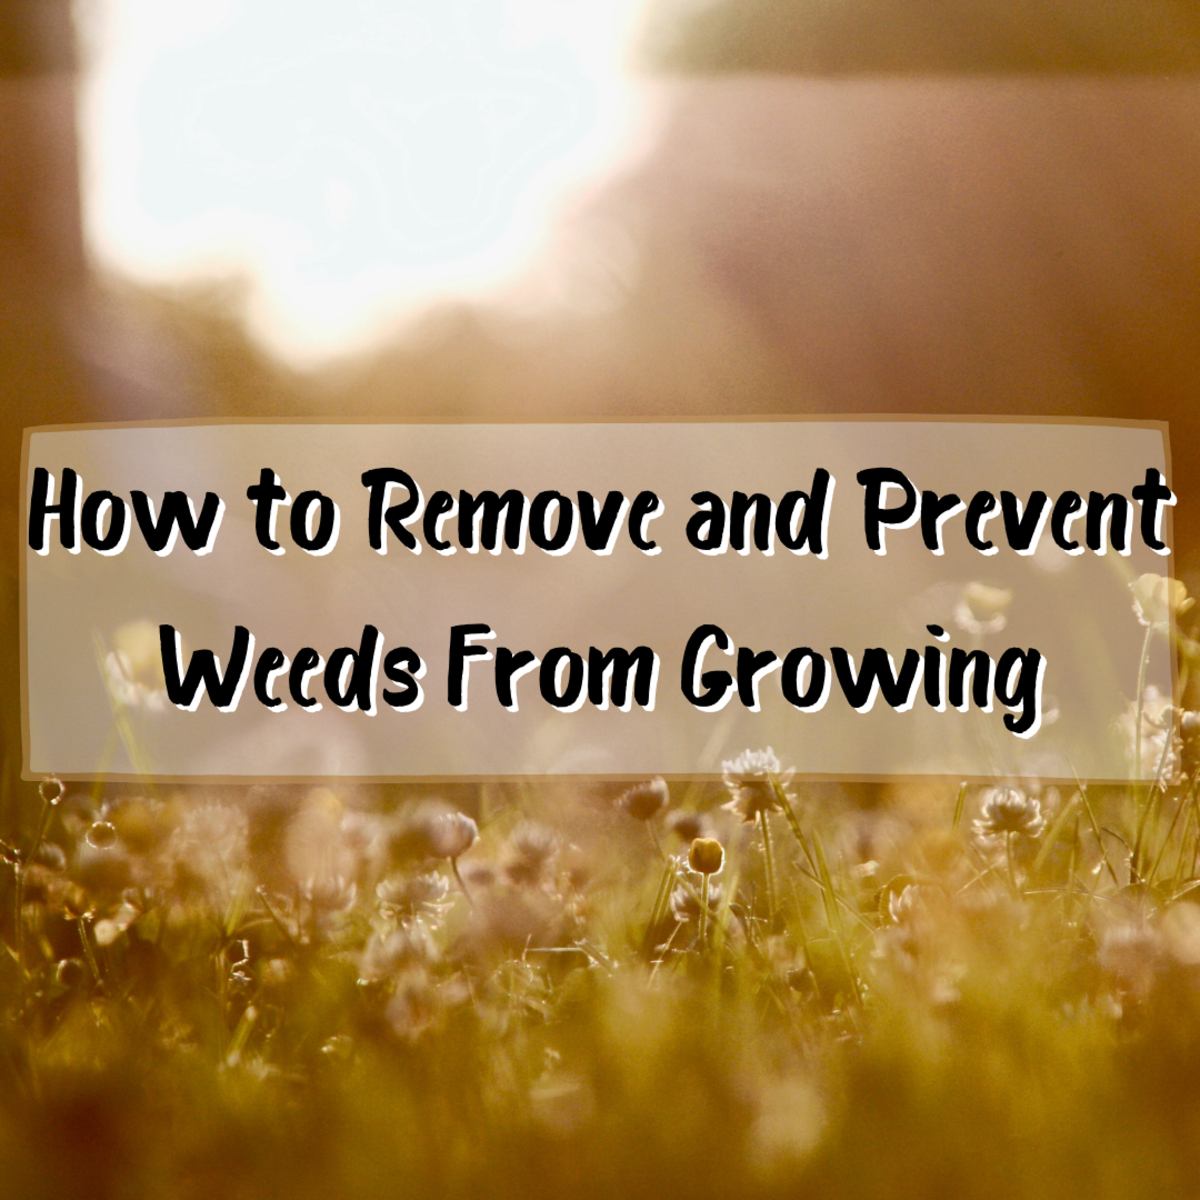 How to Remove and Prevent Weeds From Growing in Your Yard